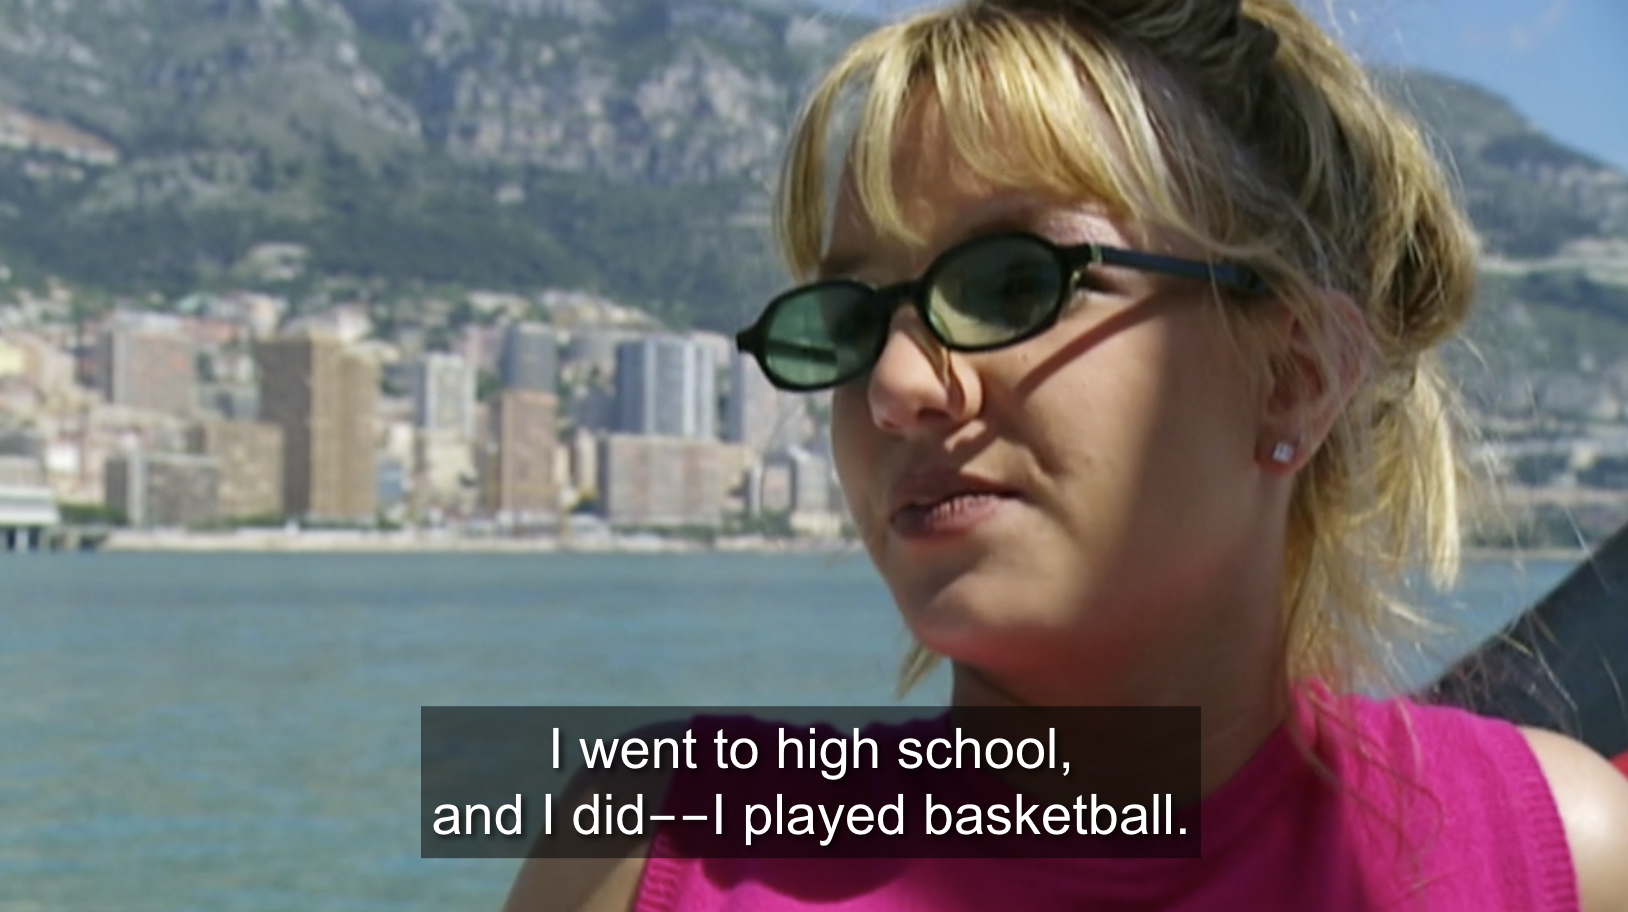 Britney talking about playing basketball in high school